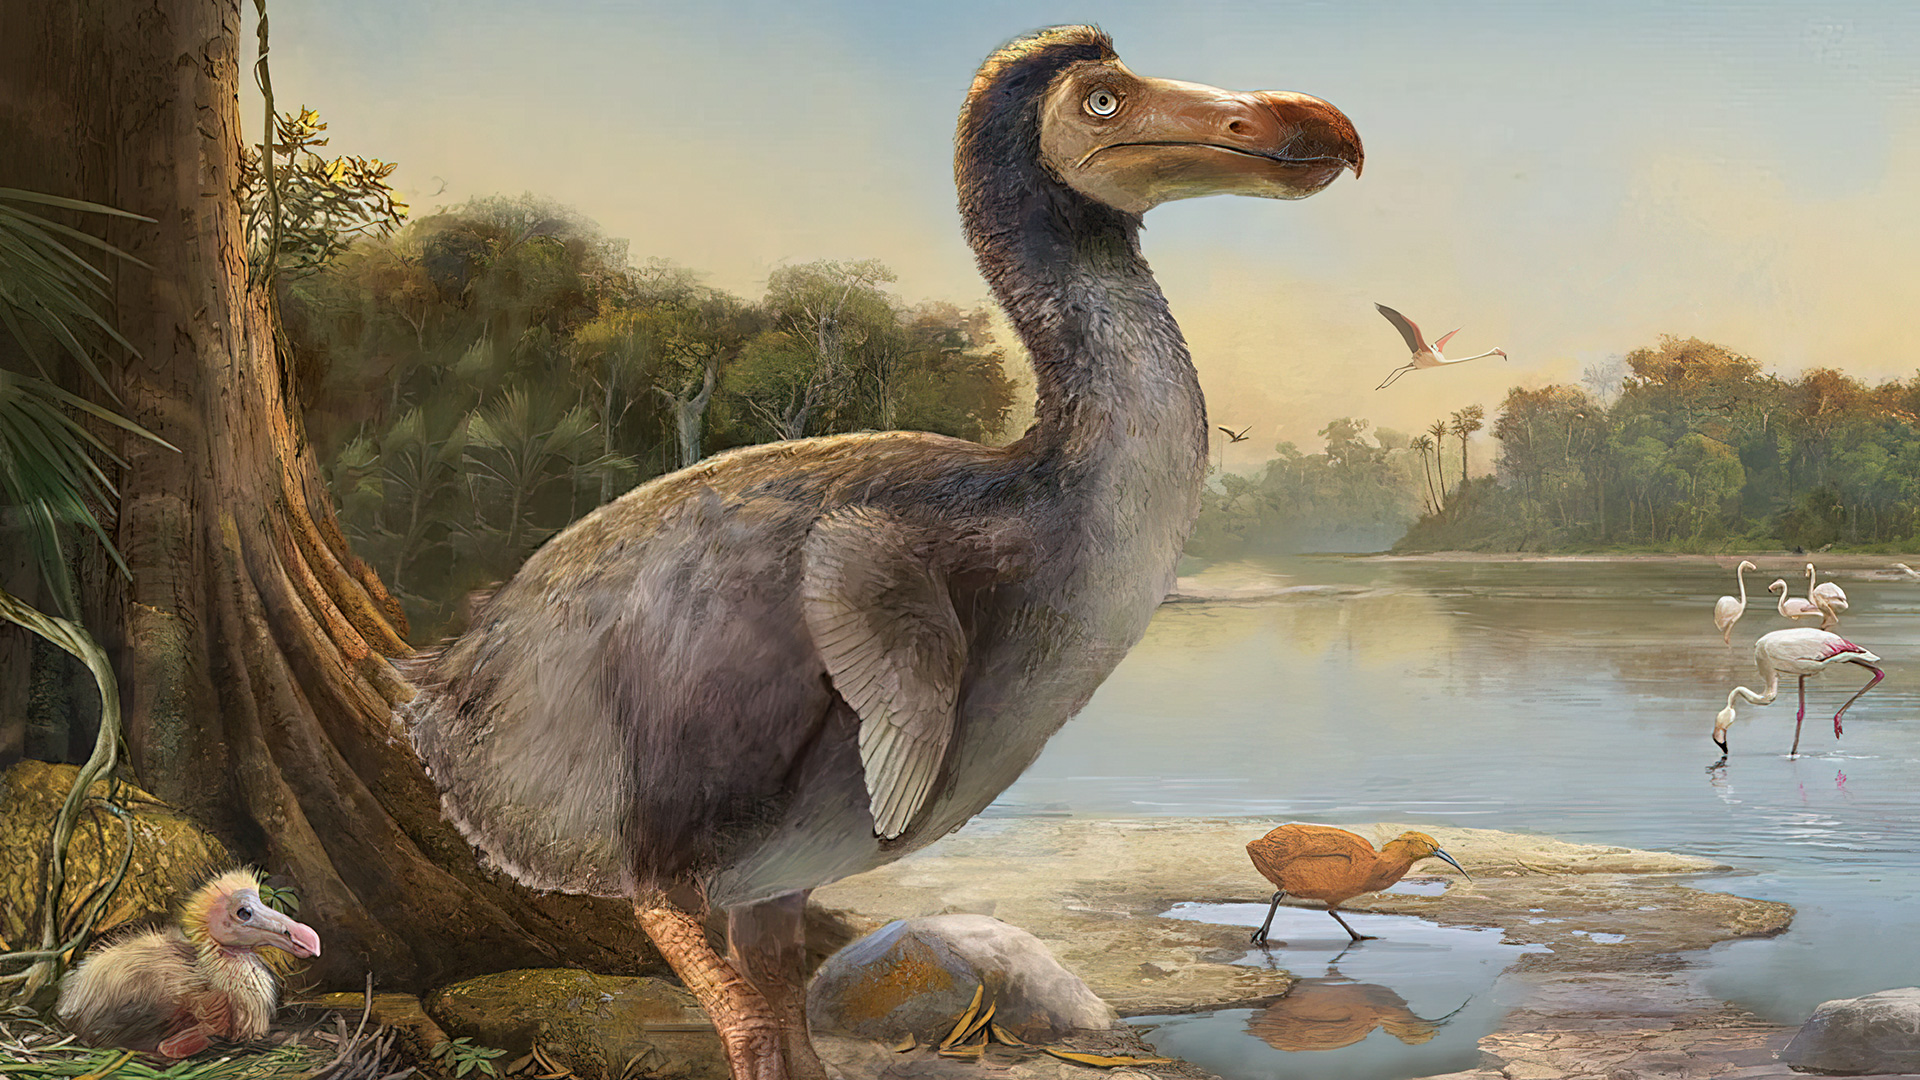 The dodo bird and factors for its extinction